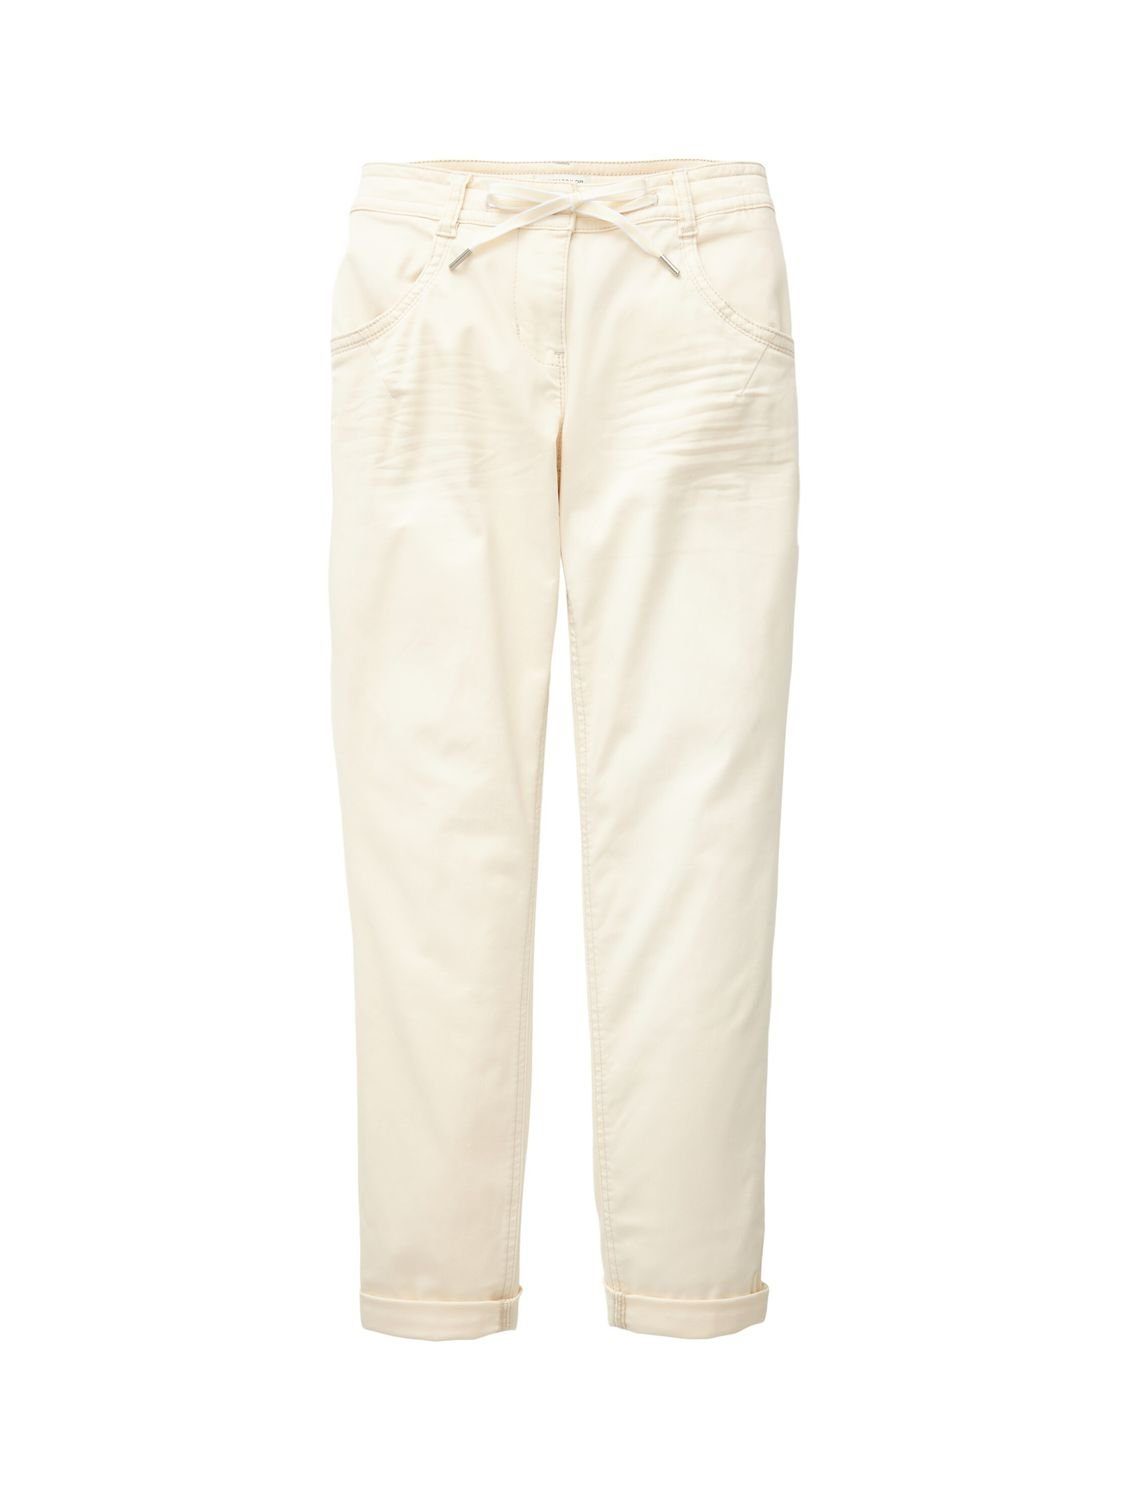 TOM TAILOR Relax-fit-Jeans 31649 RELAXED Ecru TAPERED Stretch Ivory mit